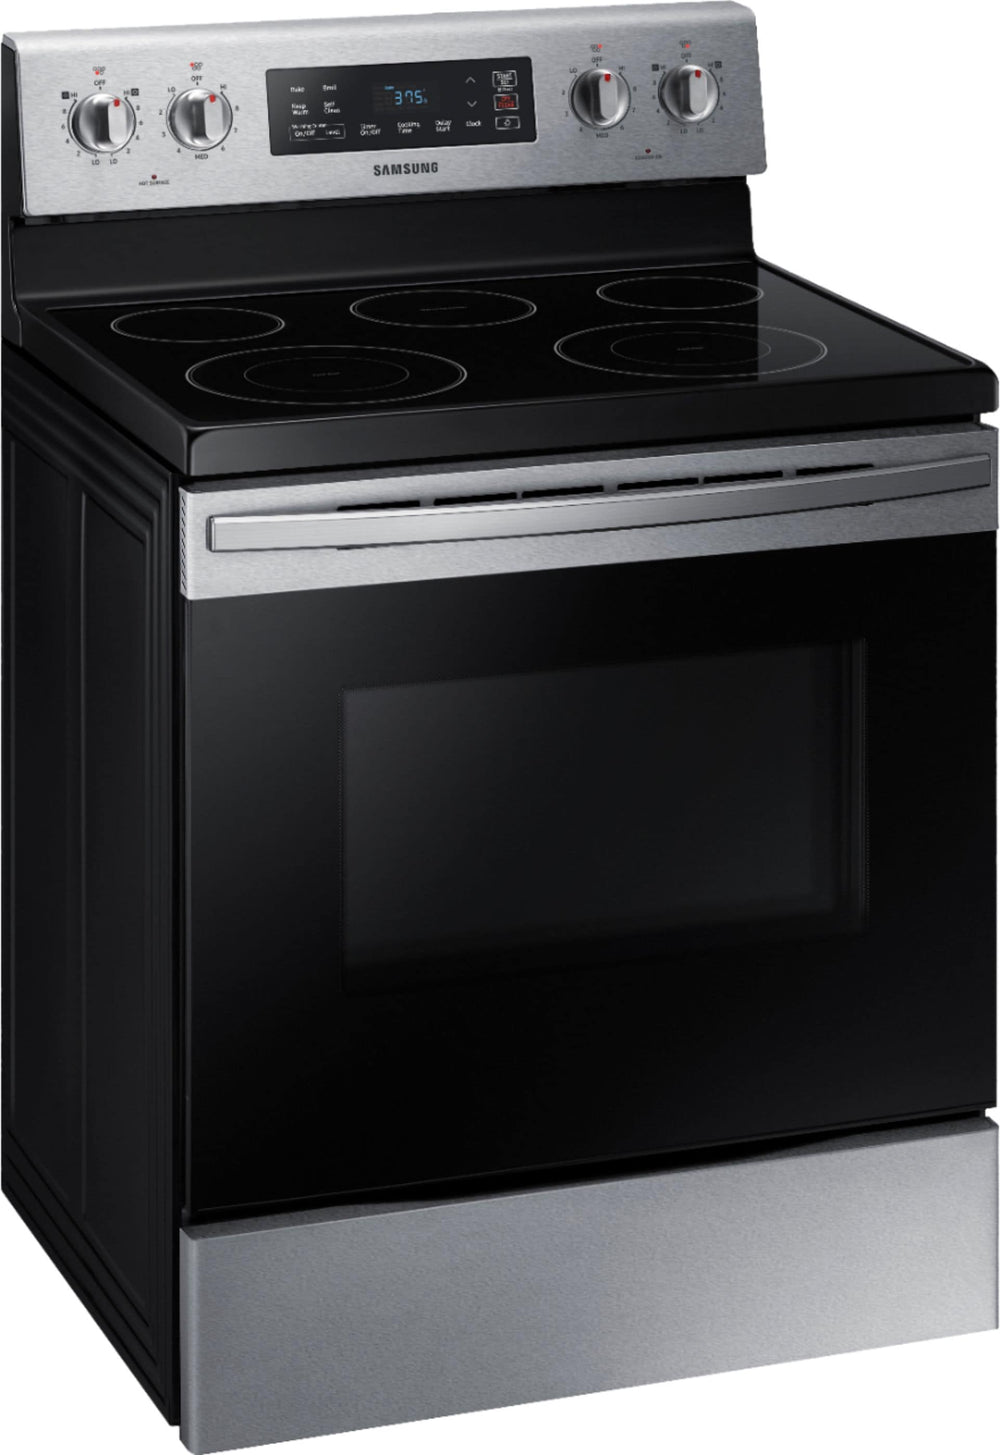 Samsung - 5.9 cu. ft. Freestanding Electric Range with Self-Cleaning - Stainless steel_1